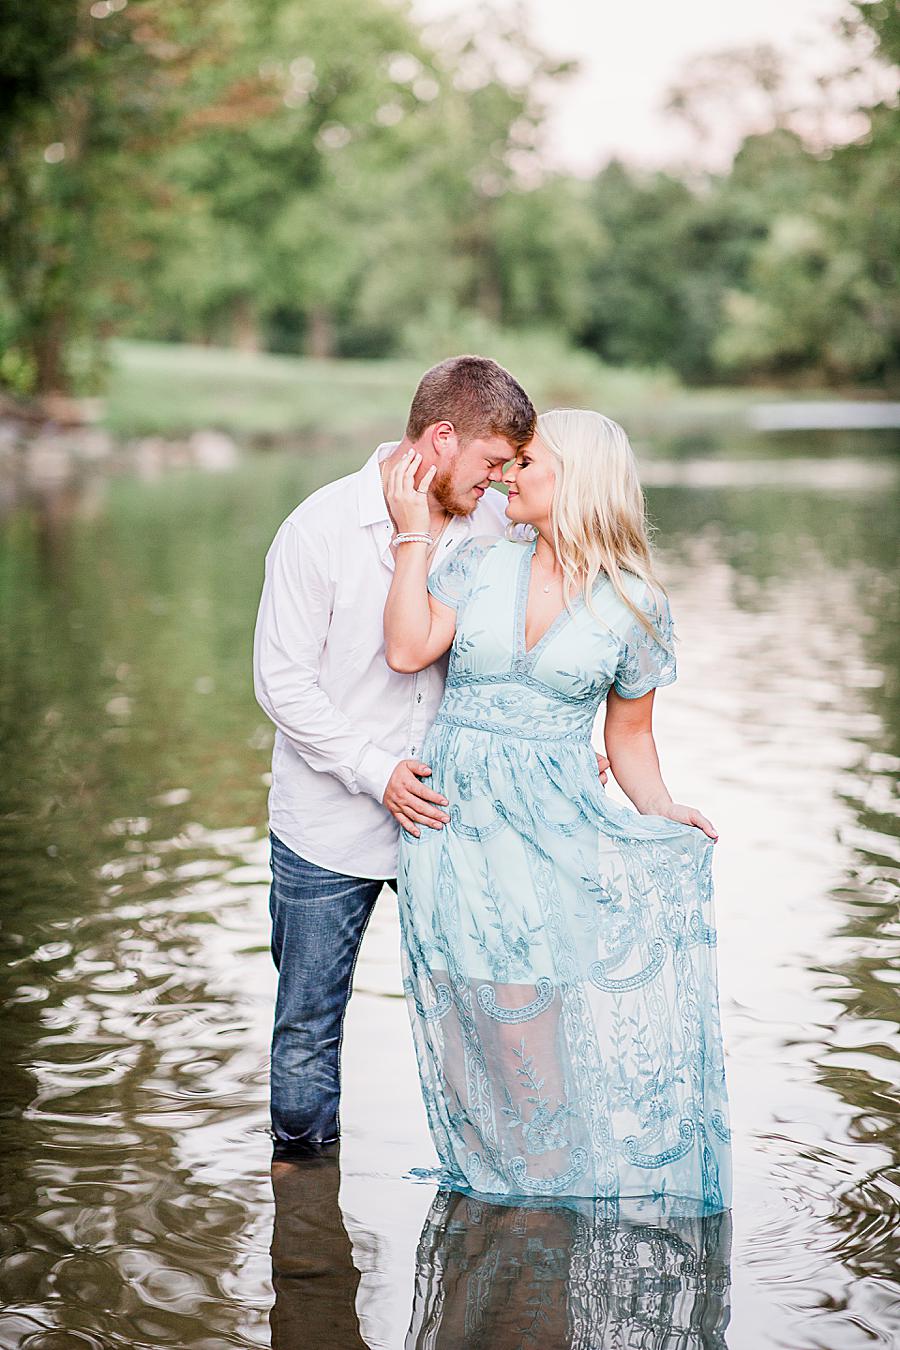 Hand on cheek by Knoxville Wedding Photographer, Amanda May Photos.